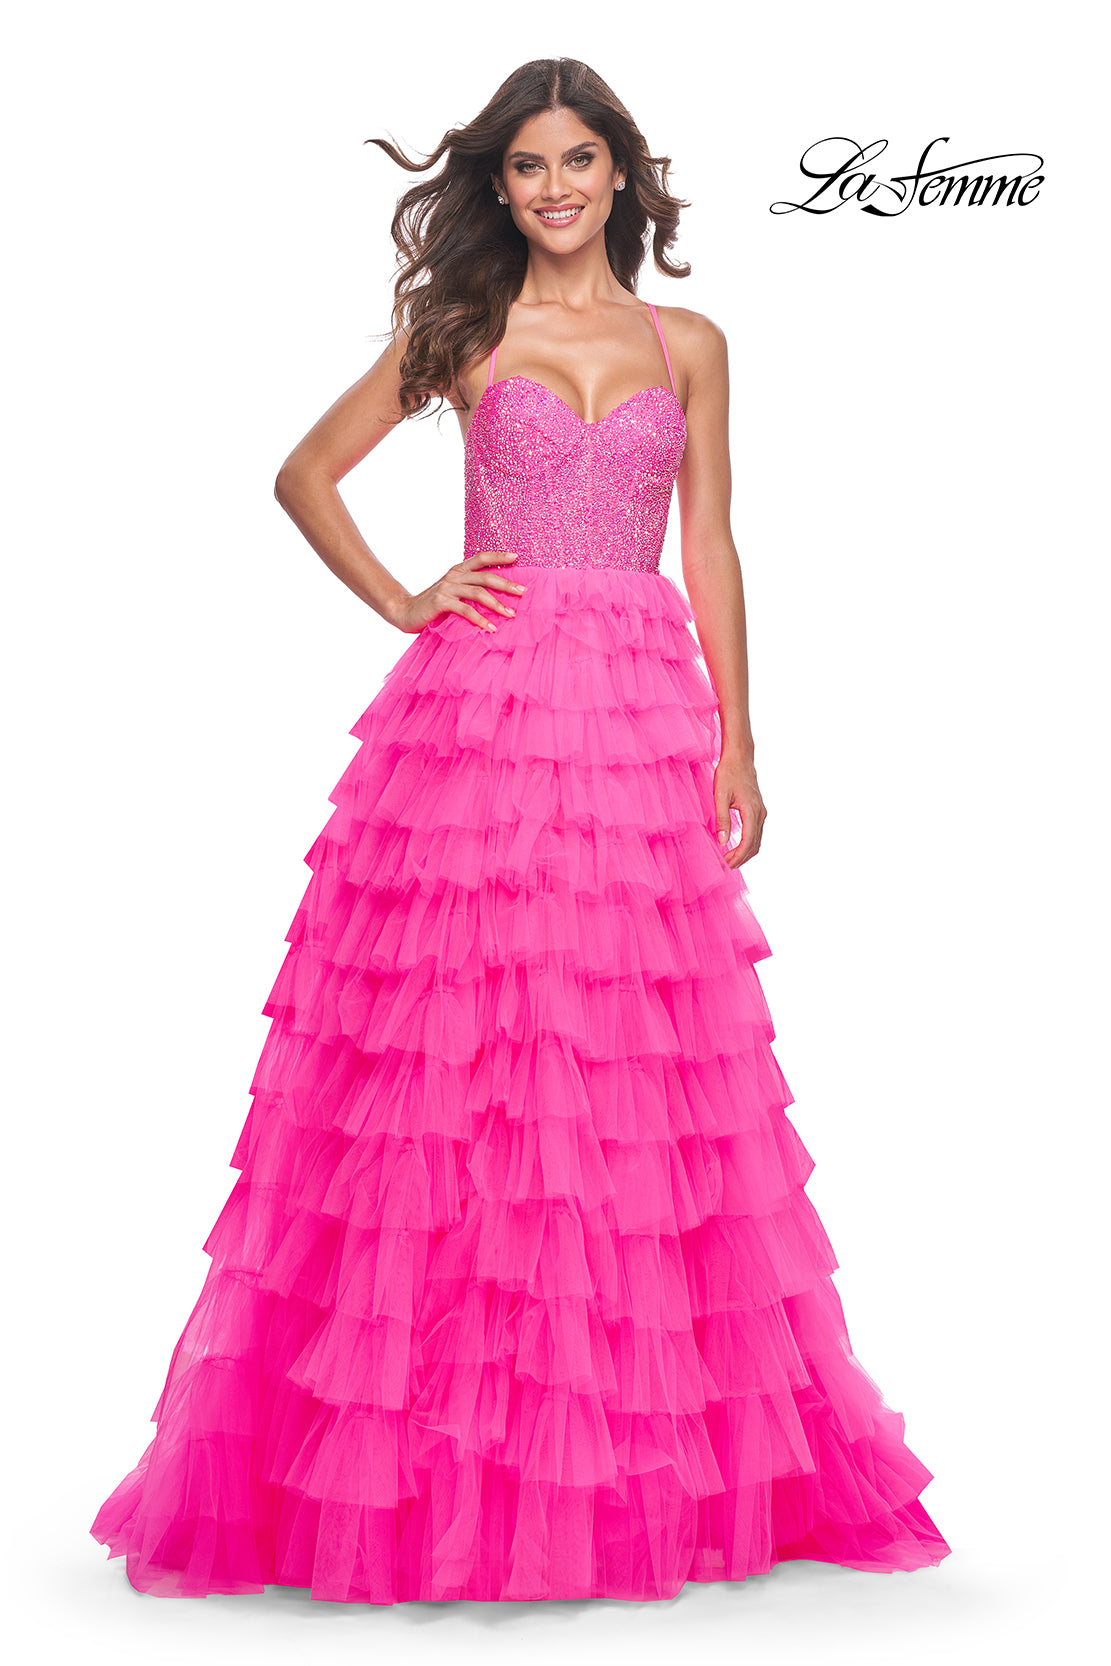 La-Femme-32335-Sweetheart-Neckline-Lace-up-Back-High-Slit-Hot-Stone-Tulle-Ball-Gowns-NeonPink-Evening-Dress-B-Chic-Fashions-Prom-Dress